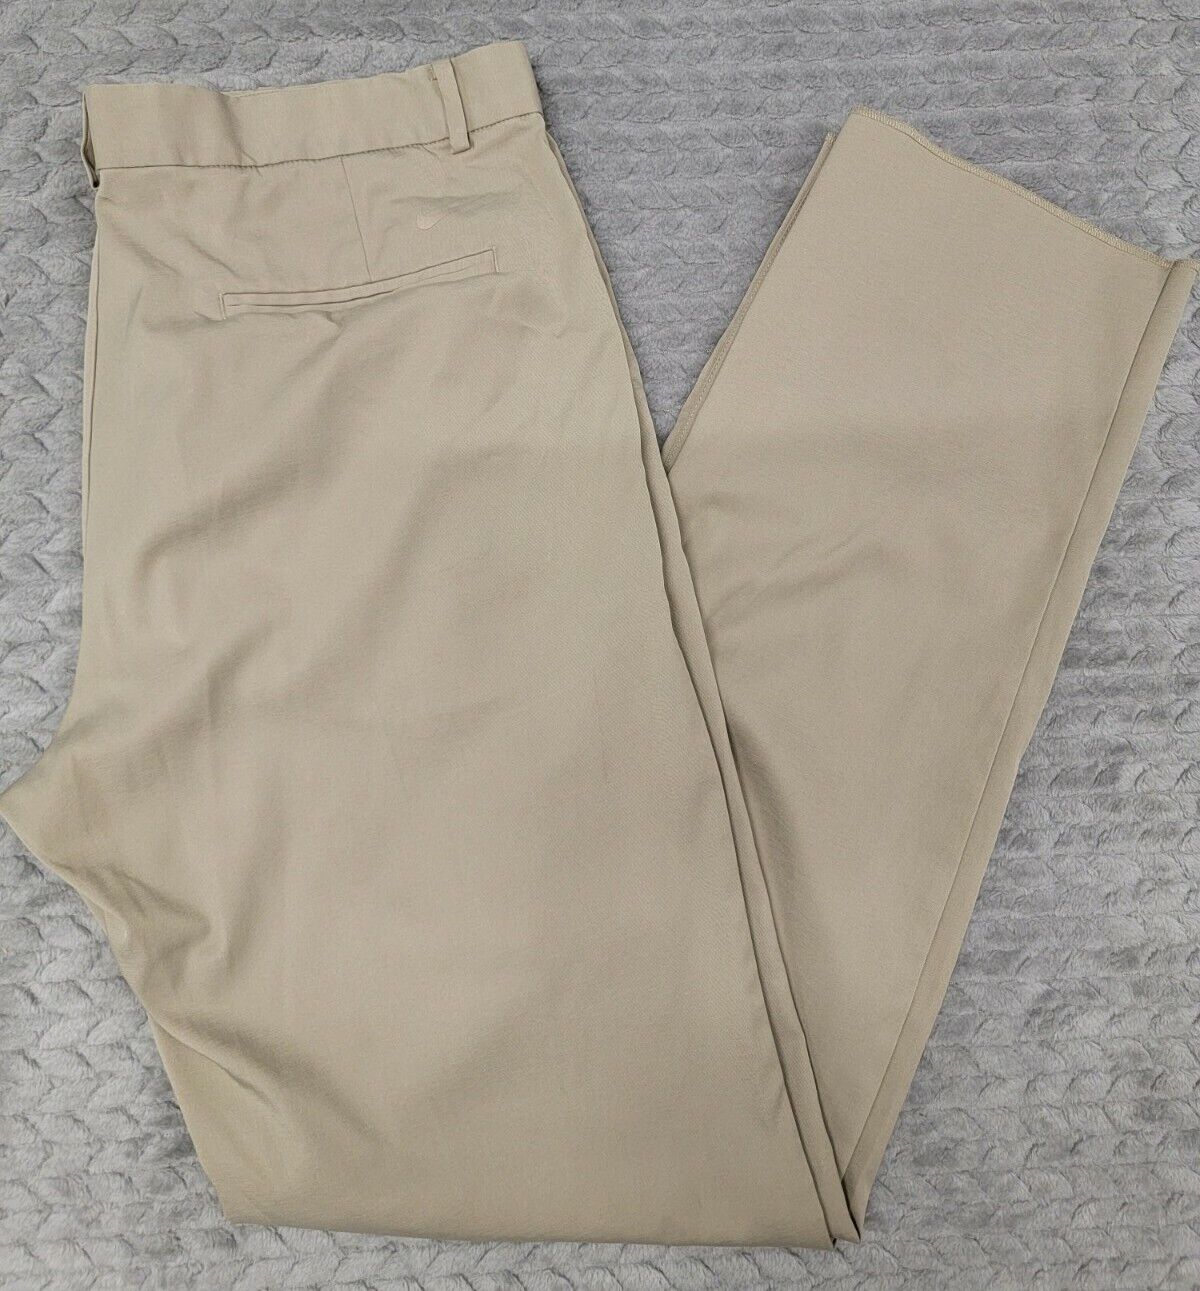 Nike Flat Fixed price for sale Front Weekly update Tech Golf Unhemmed Chino Men's Pants 36x35 Size